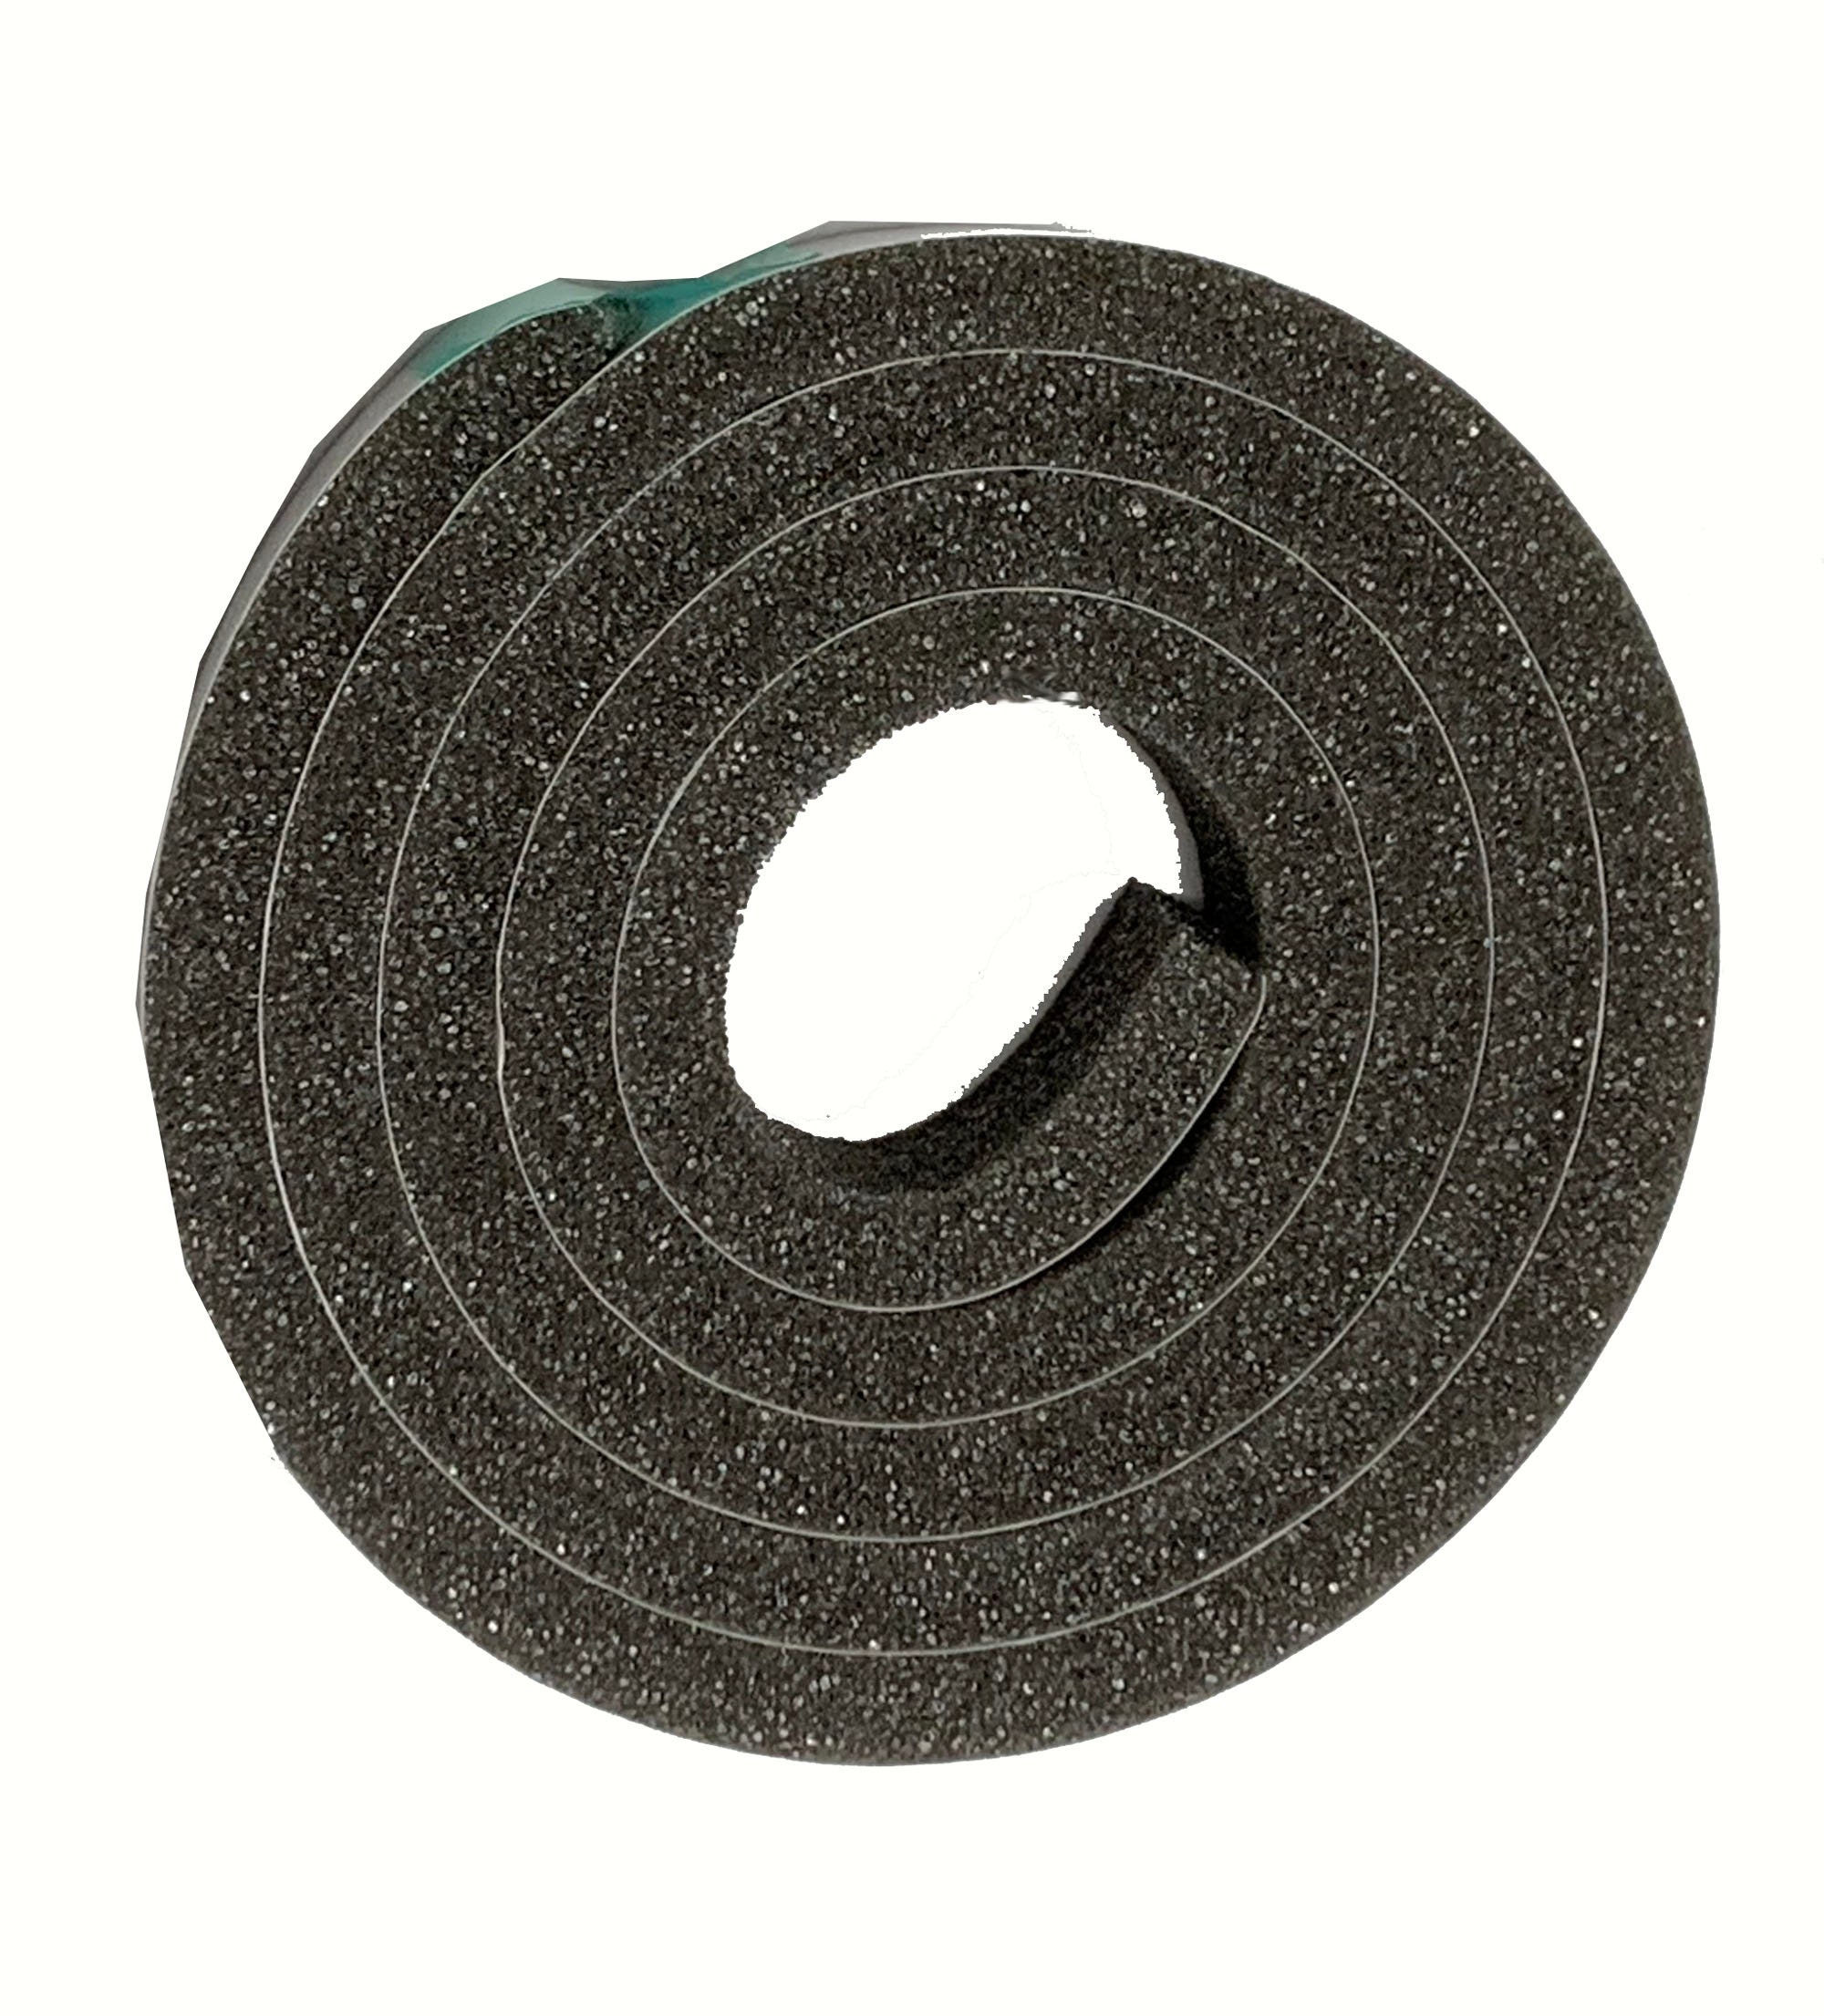 Hat Size Reducer Tape sold by the Foot